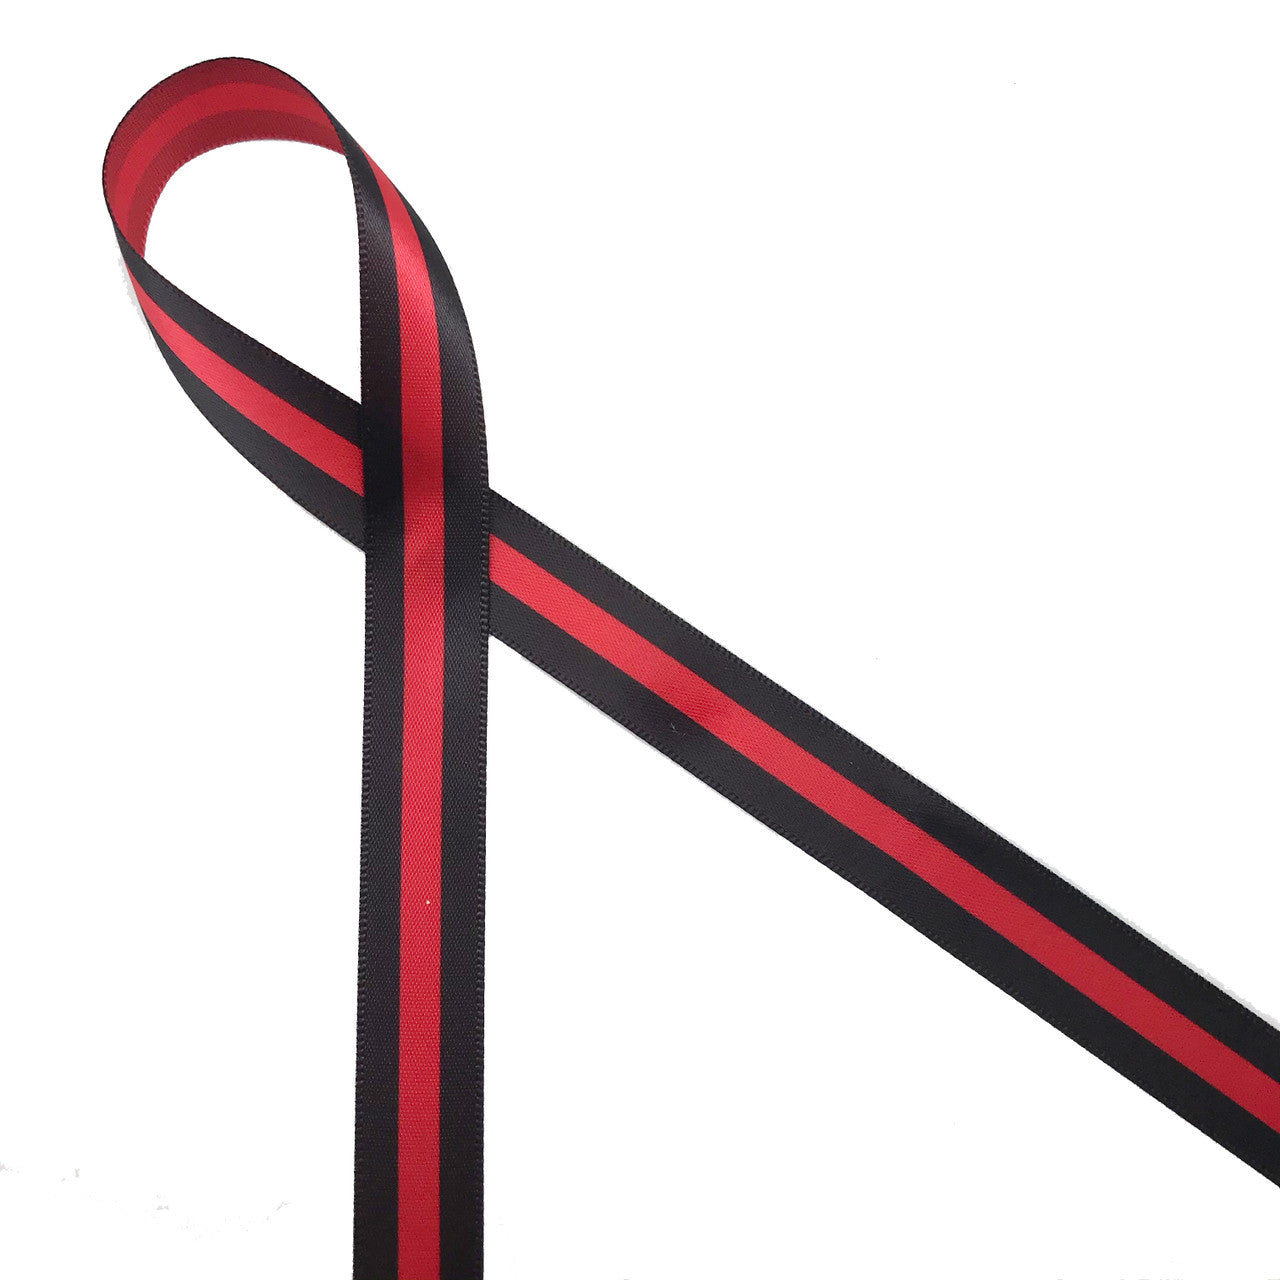 Firefighter Thin Red Line Ribbon, black lines printed on 5/8" Red single face satin